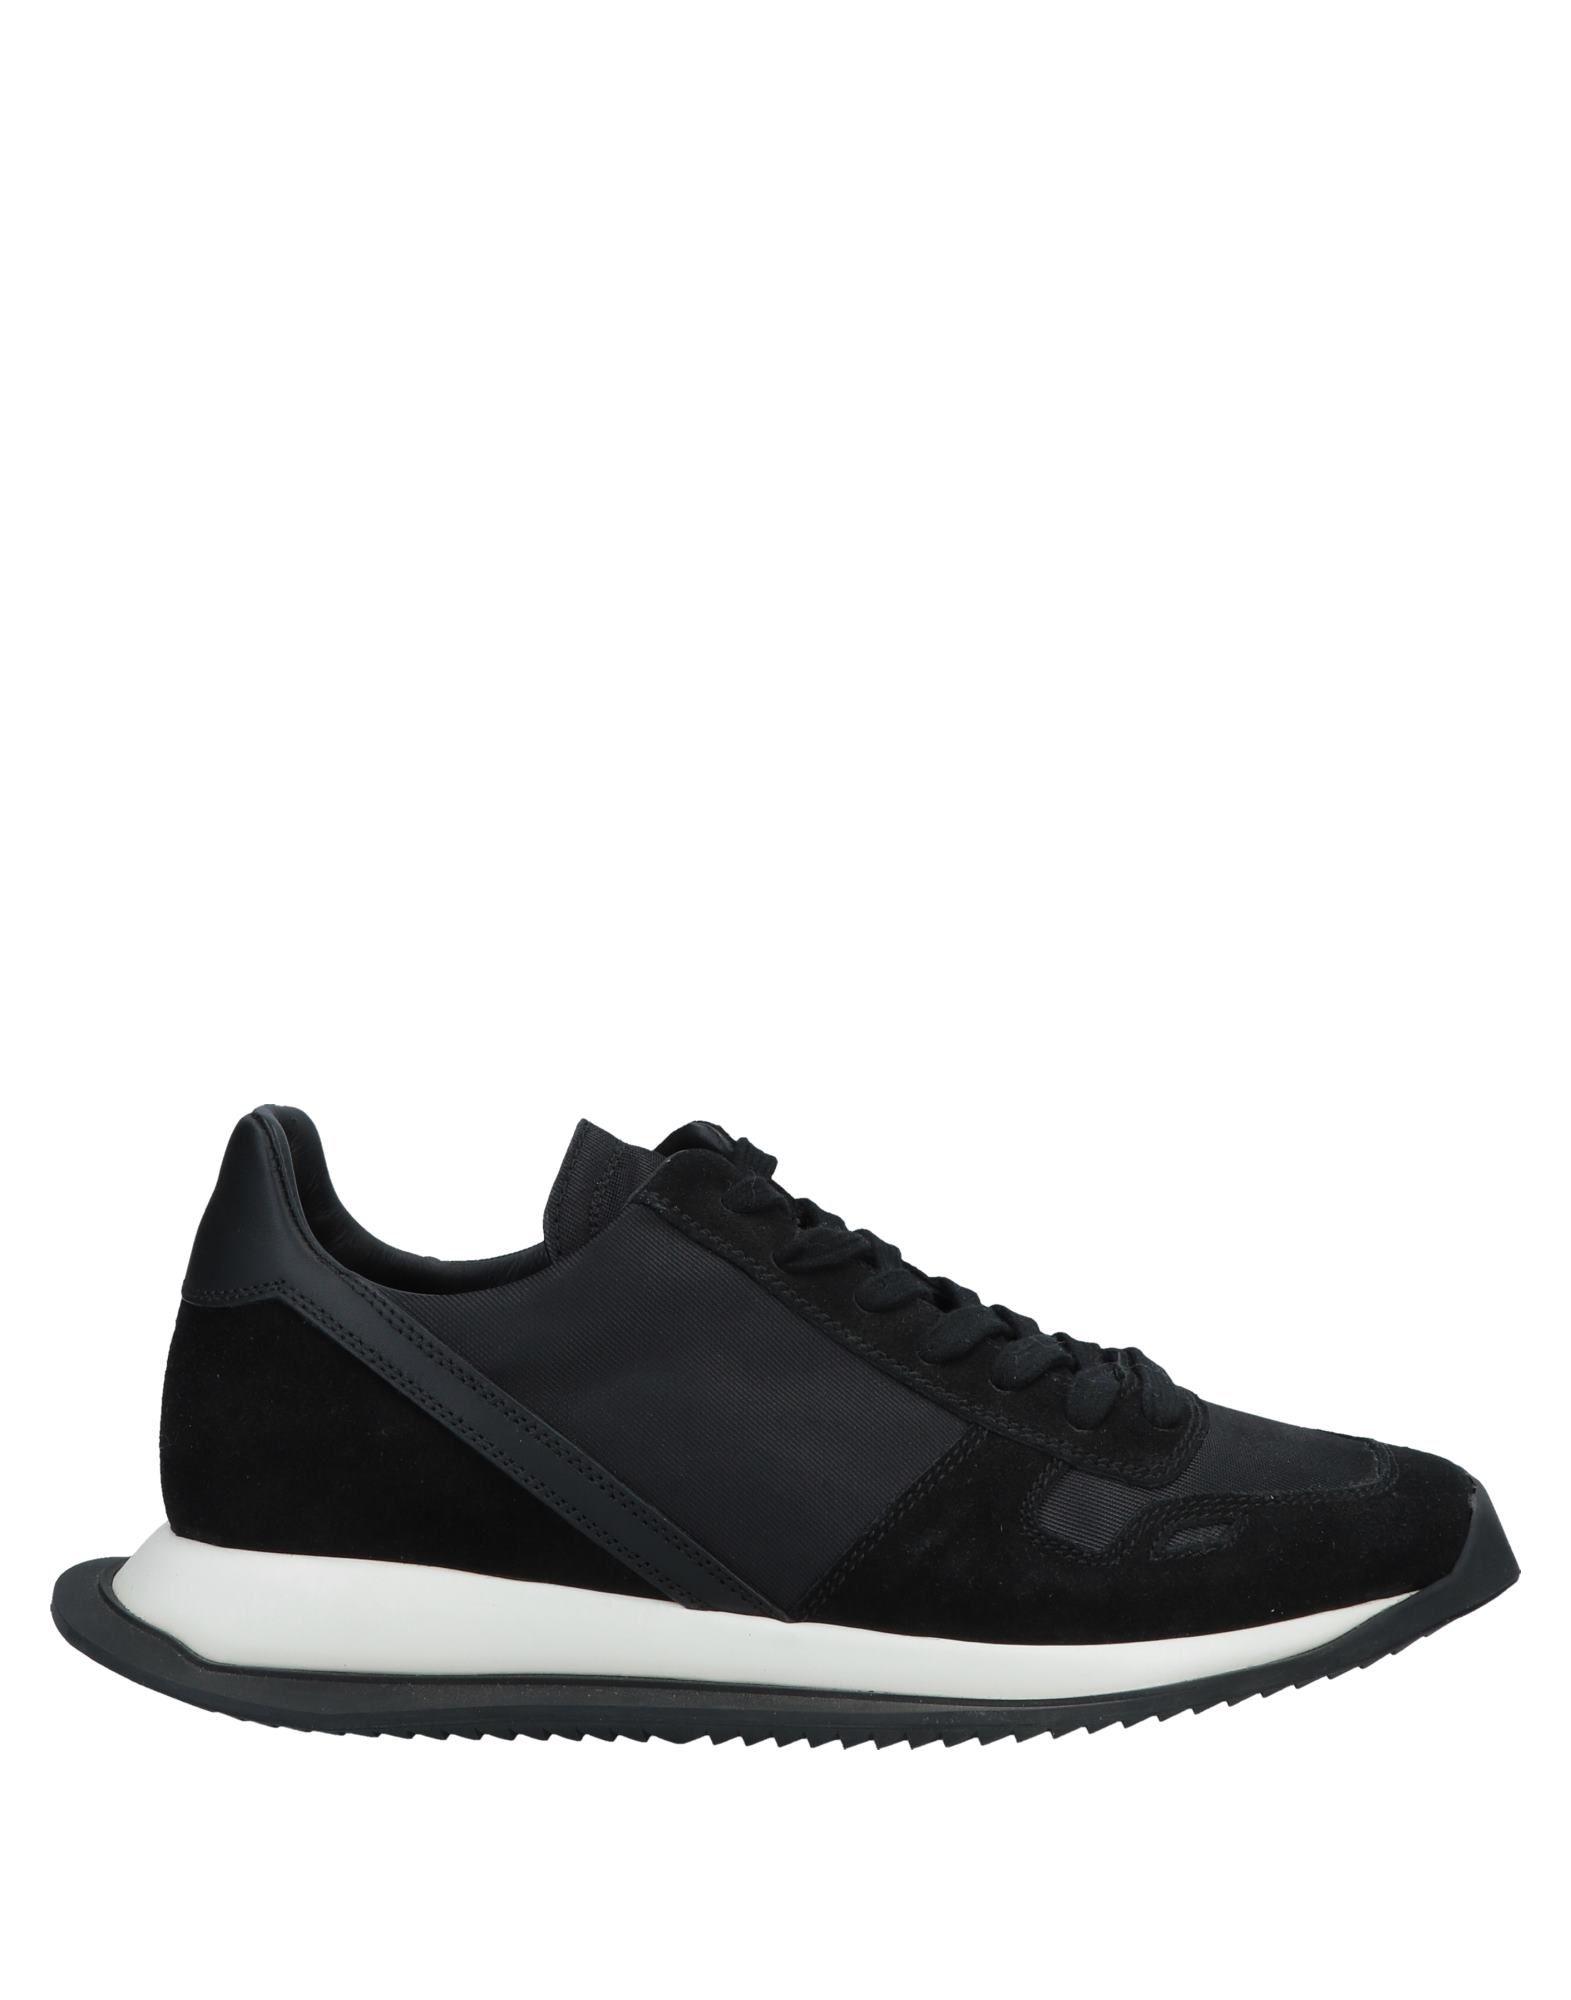 Rick Owens Leather Low-tops & Sneakers in Black - Lyst